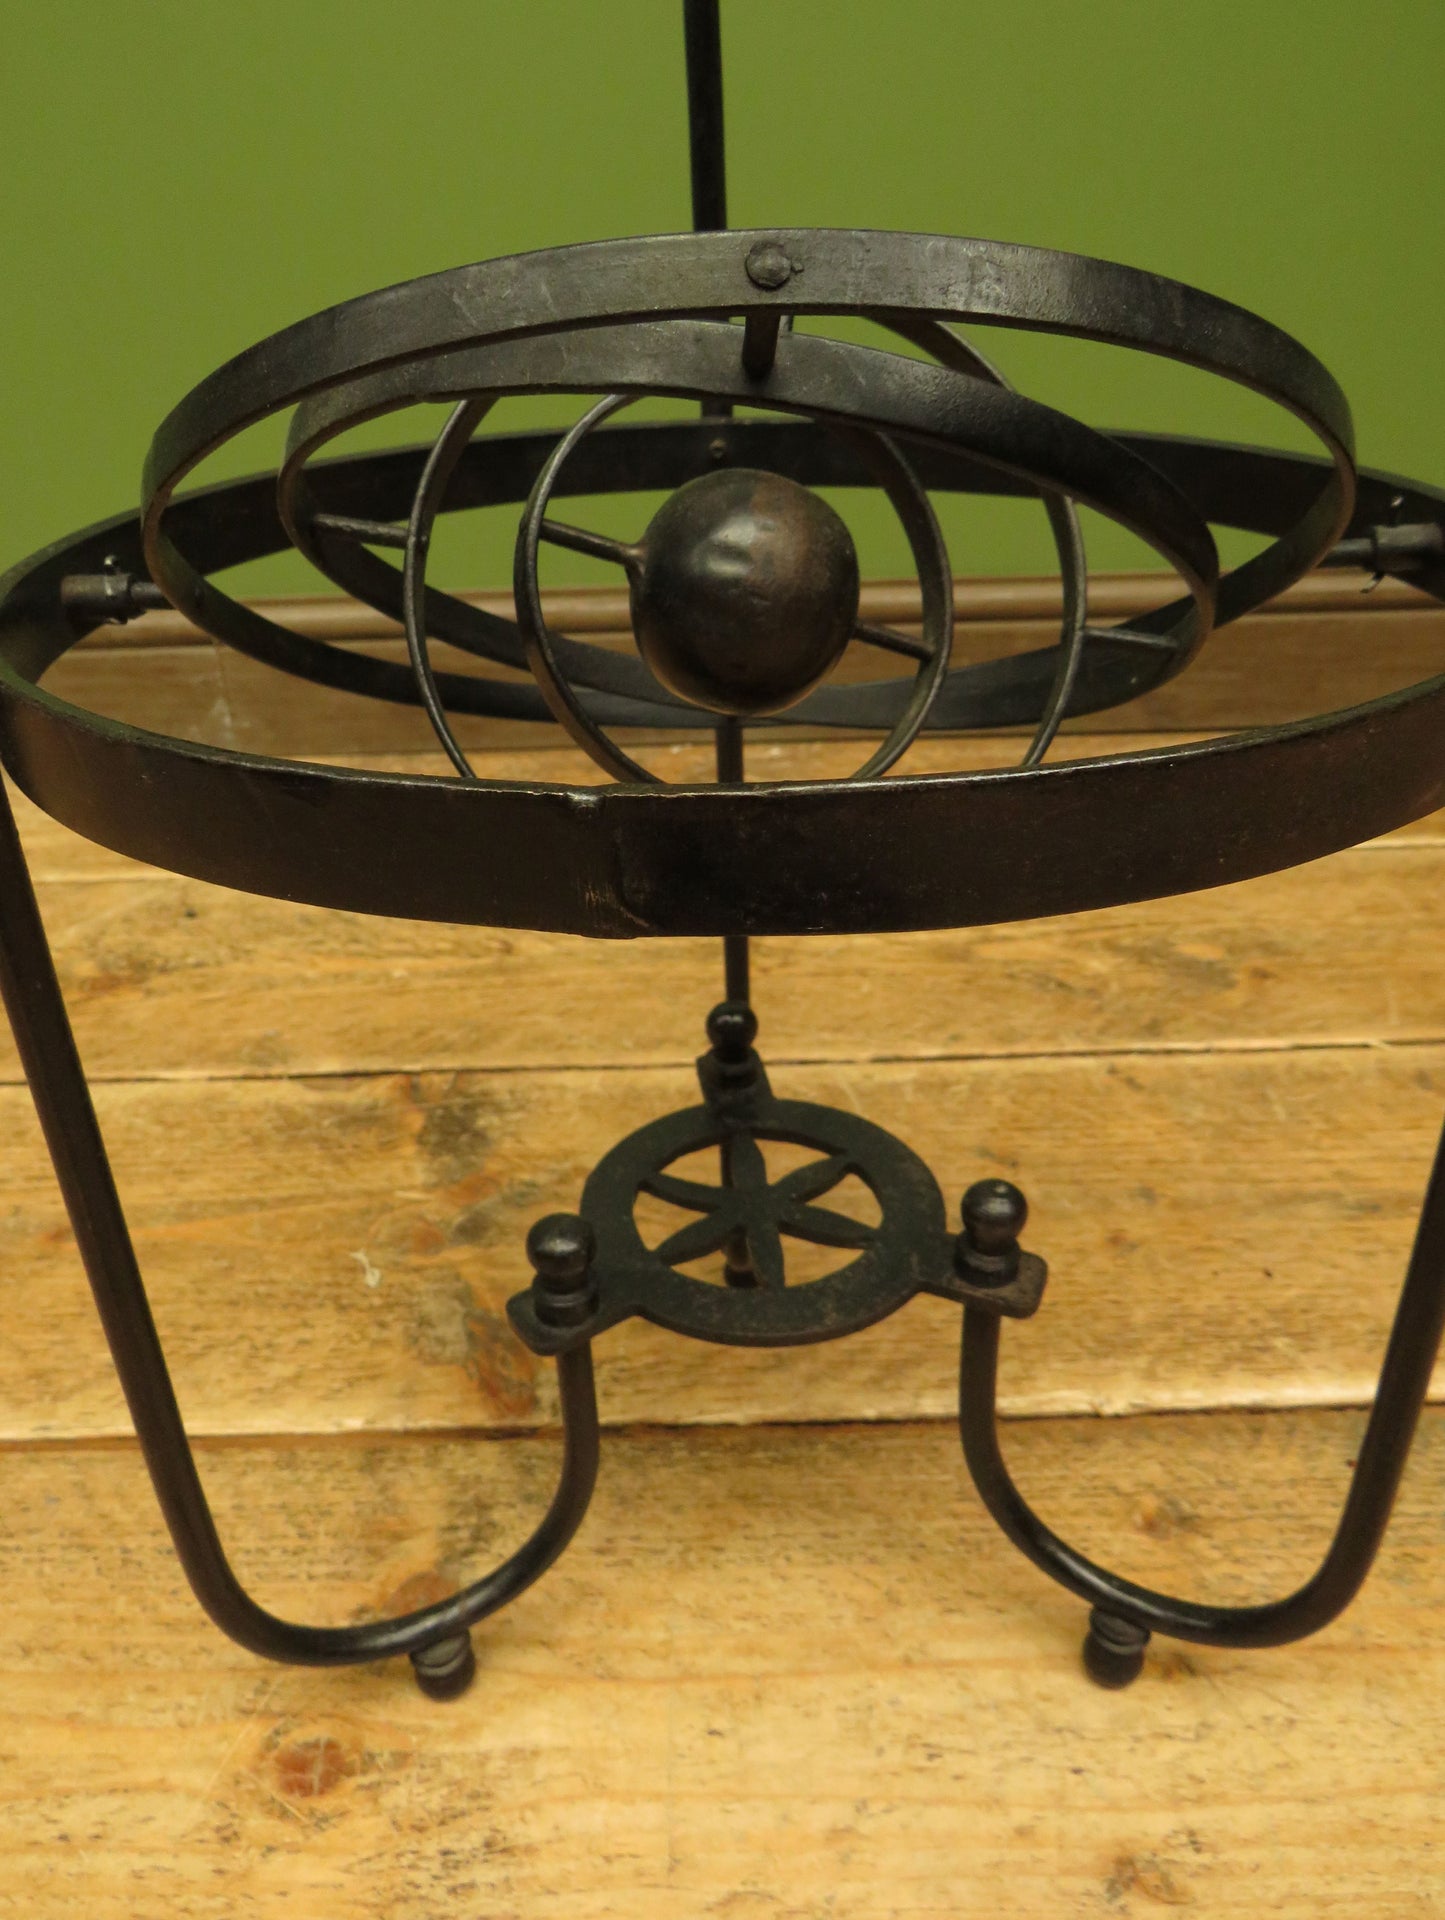 Vintage Steampunk Side Table with Gimbal mounted solar system